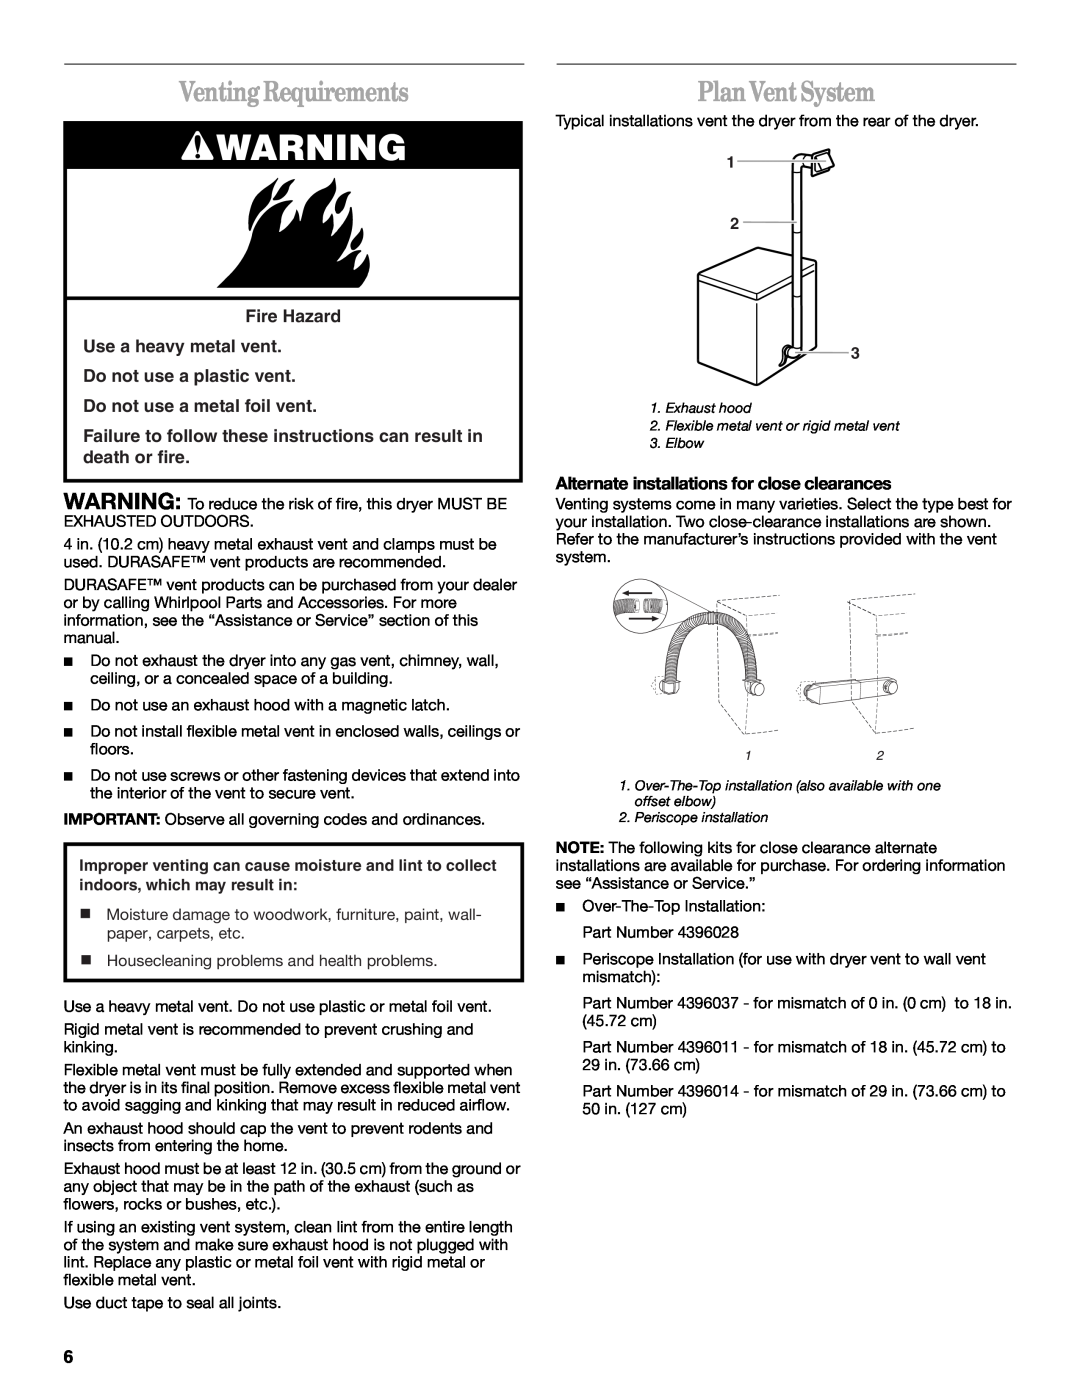 Whirlpool 3406879 Venting Requirements, Plan Vent System, Fire Hazard Use a heavy metal vent Do not use a plastic vent 